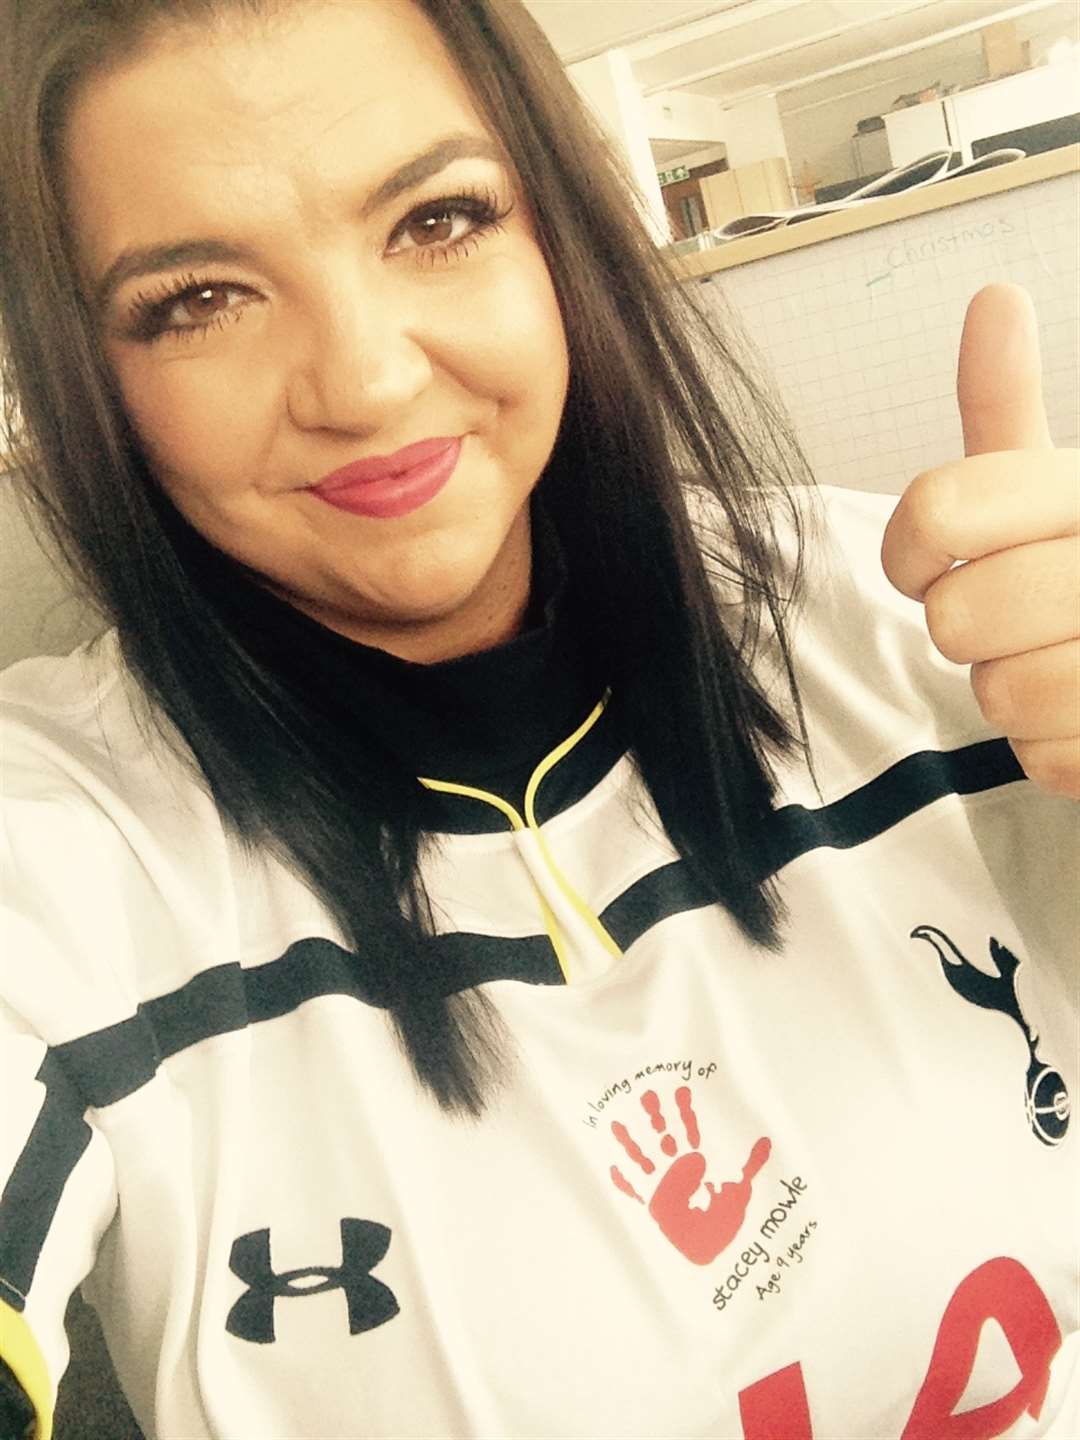 Sarah Knight wore a Spurs shirt commemorating Stacey Mowle to the match at White Hart Lane on Saturday